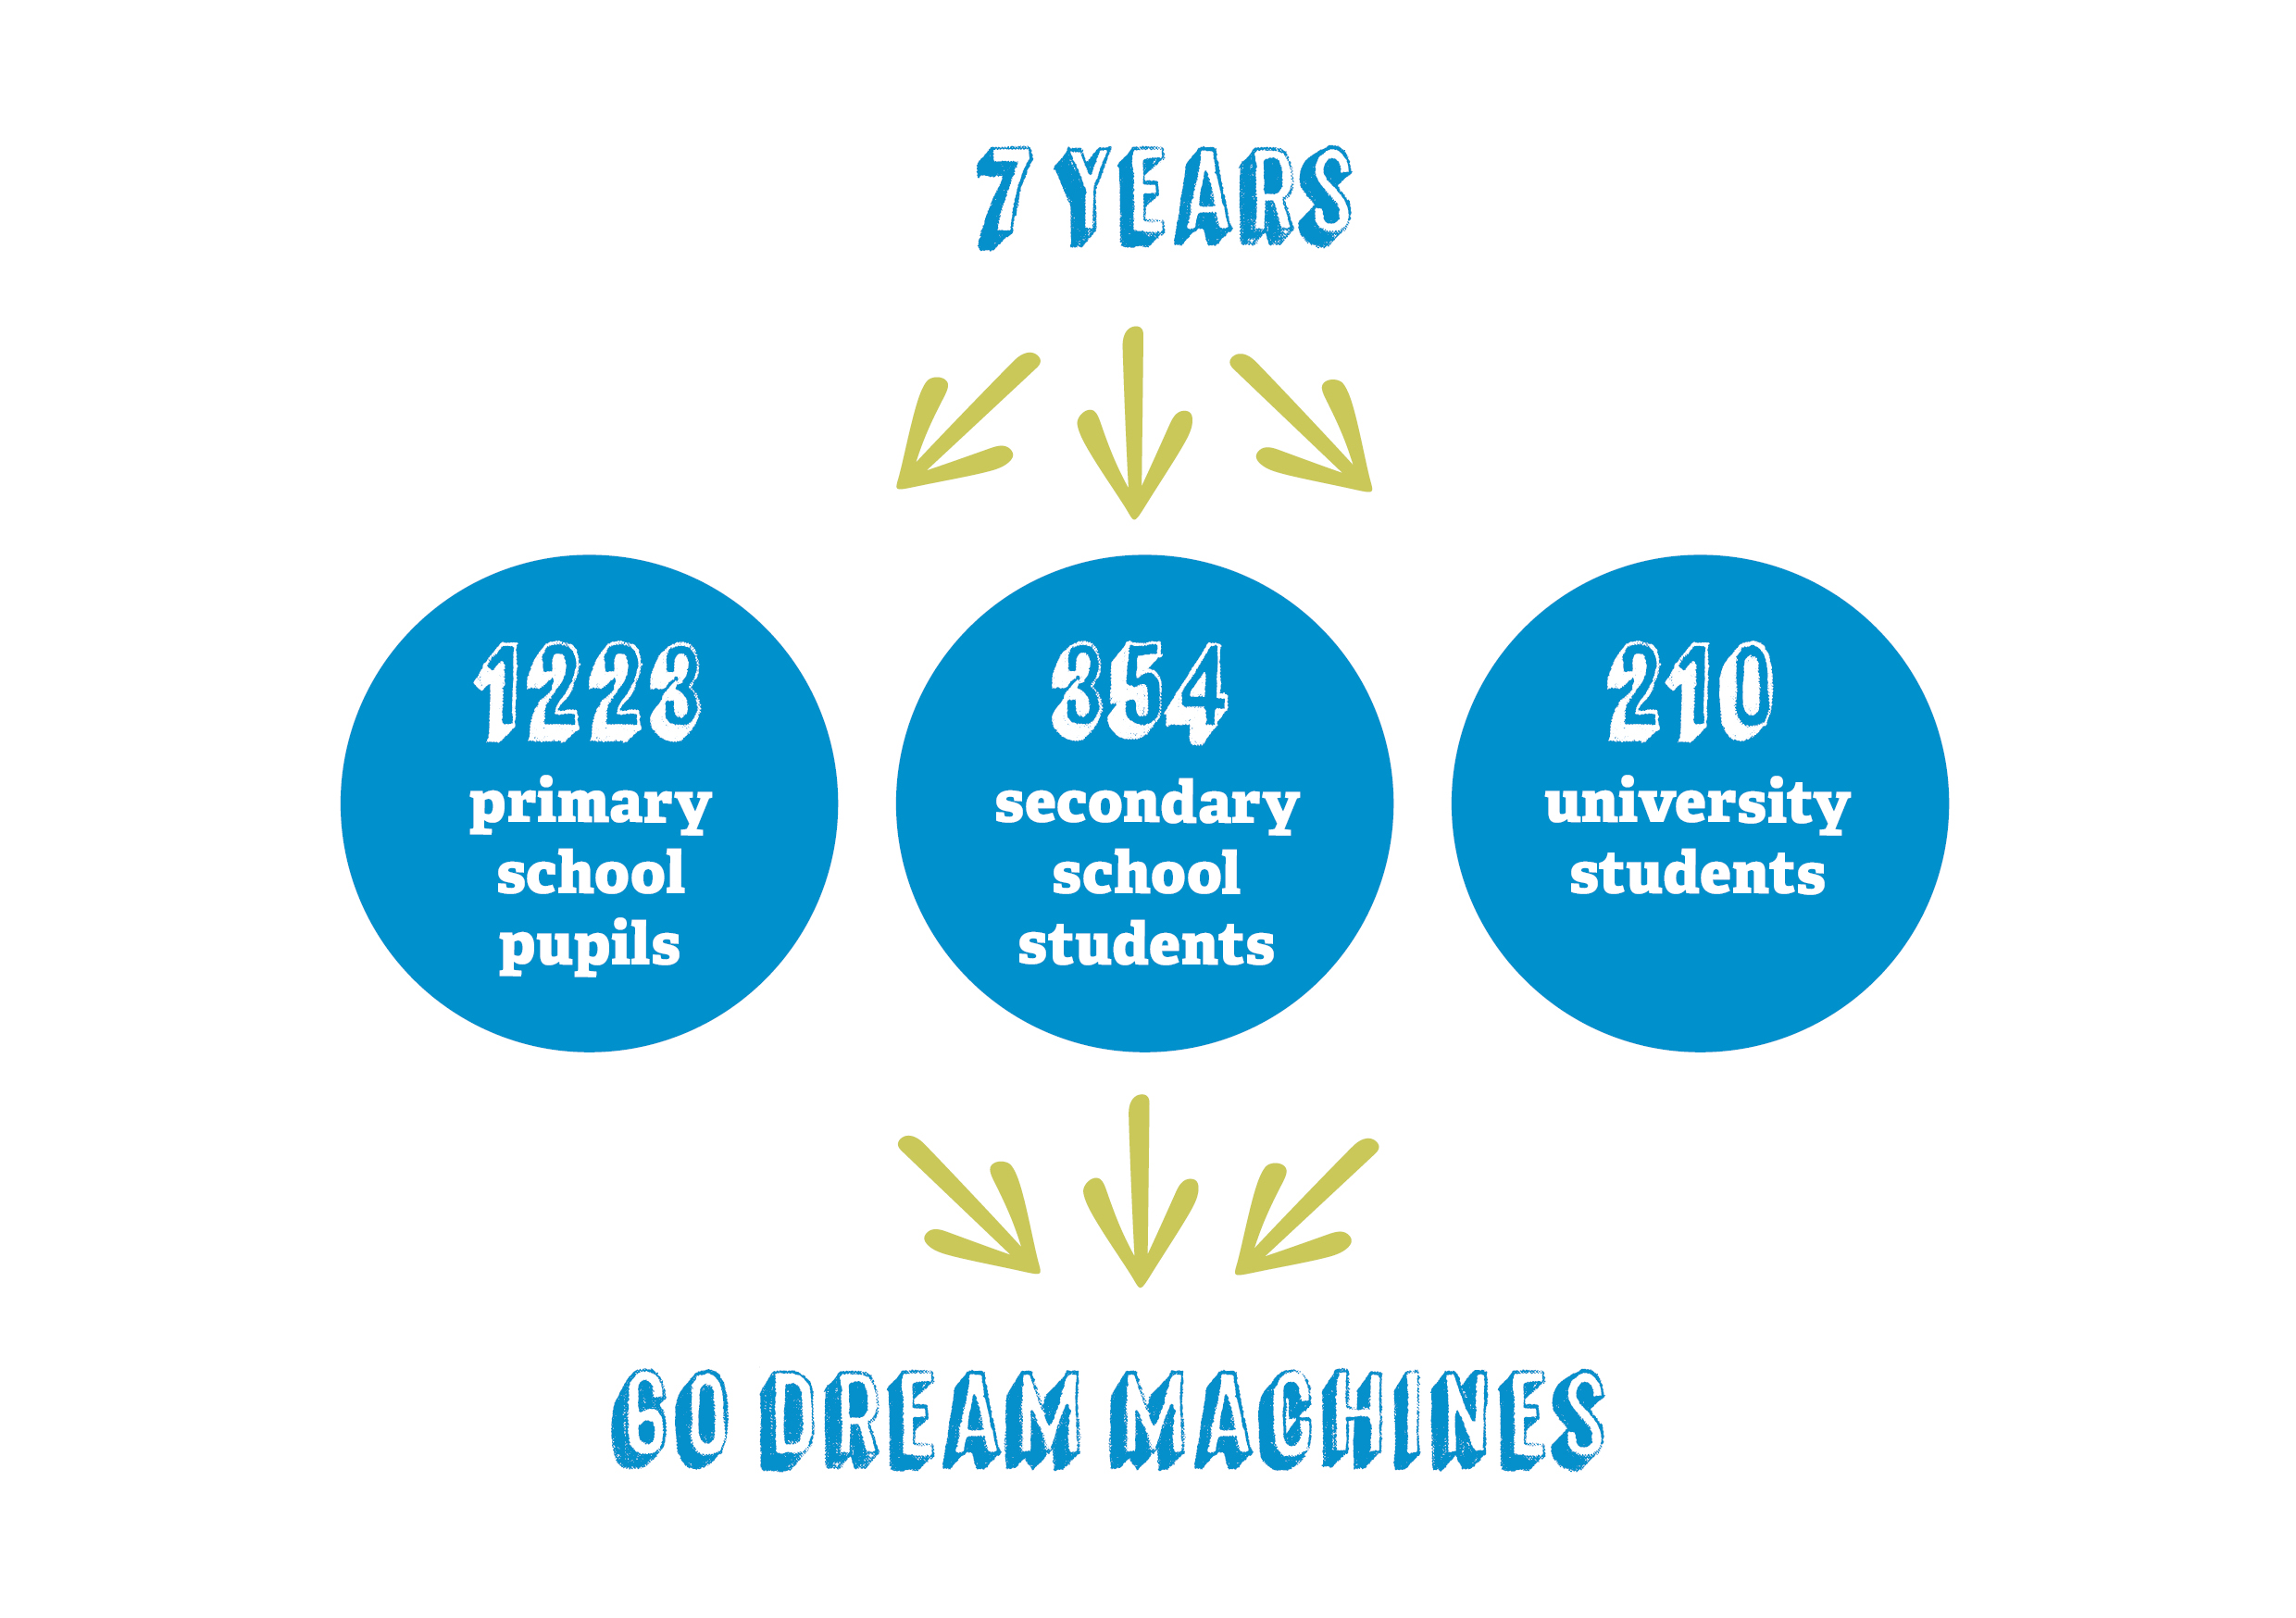 7 years of MyMachine in Slovakia - 1223 primary school pupils, 354 secondary level students ans 210 university students worked together on 60 dream machines